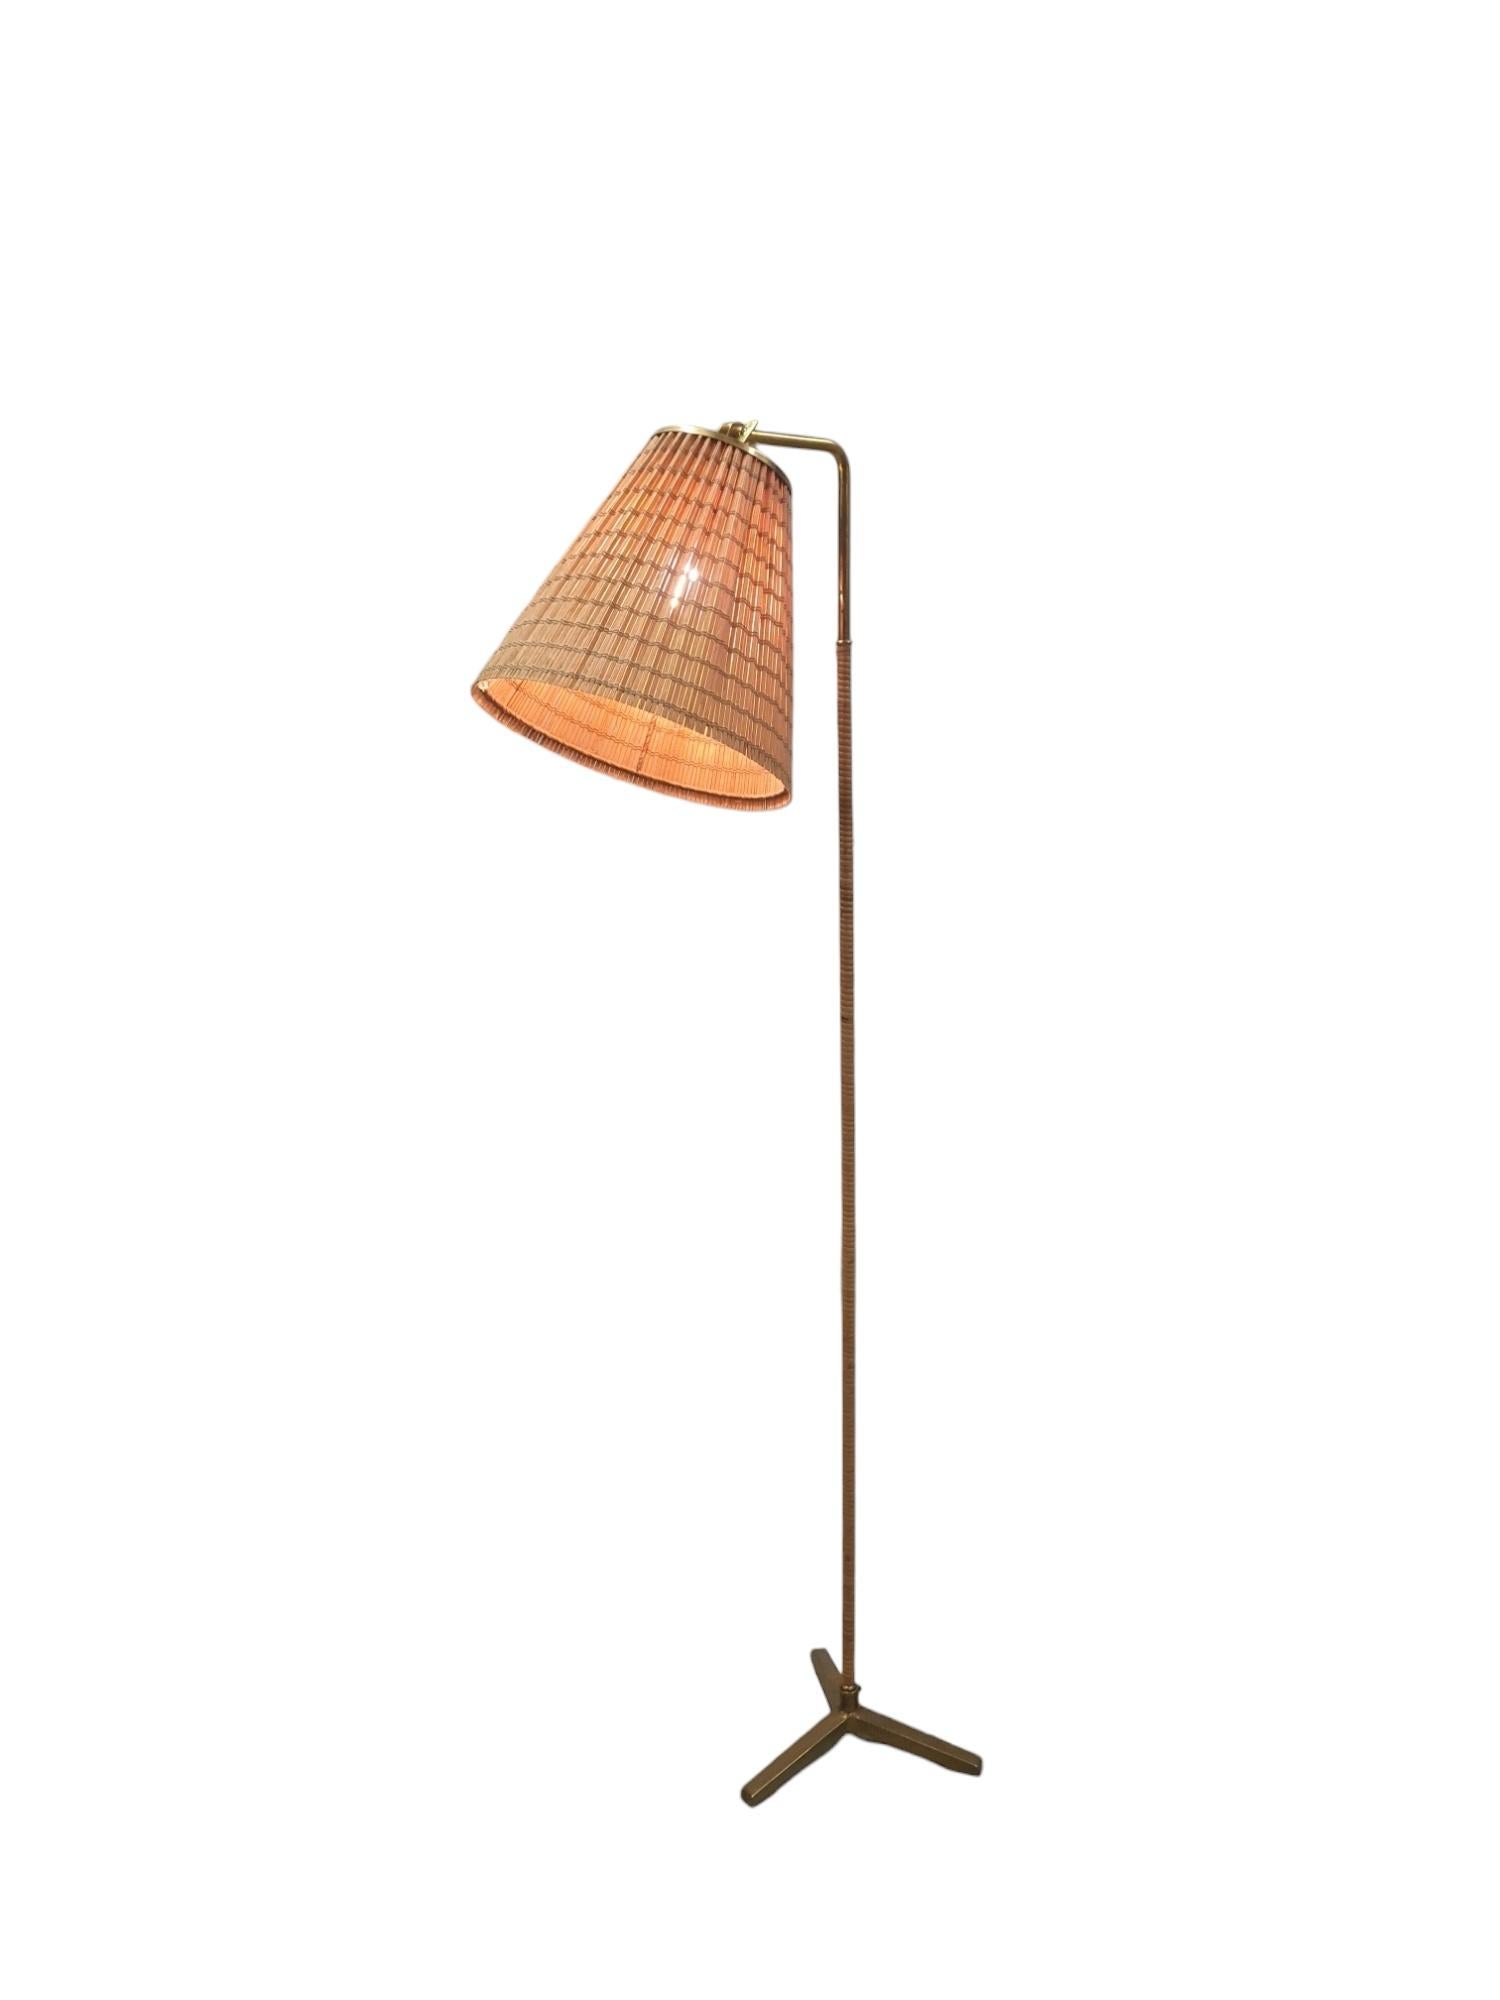 Paavo Tynell Floor Lamp Model 9631, Taito Oy In Good Condition For Sale In Helsinki, FI